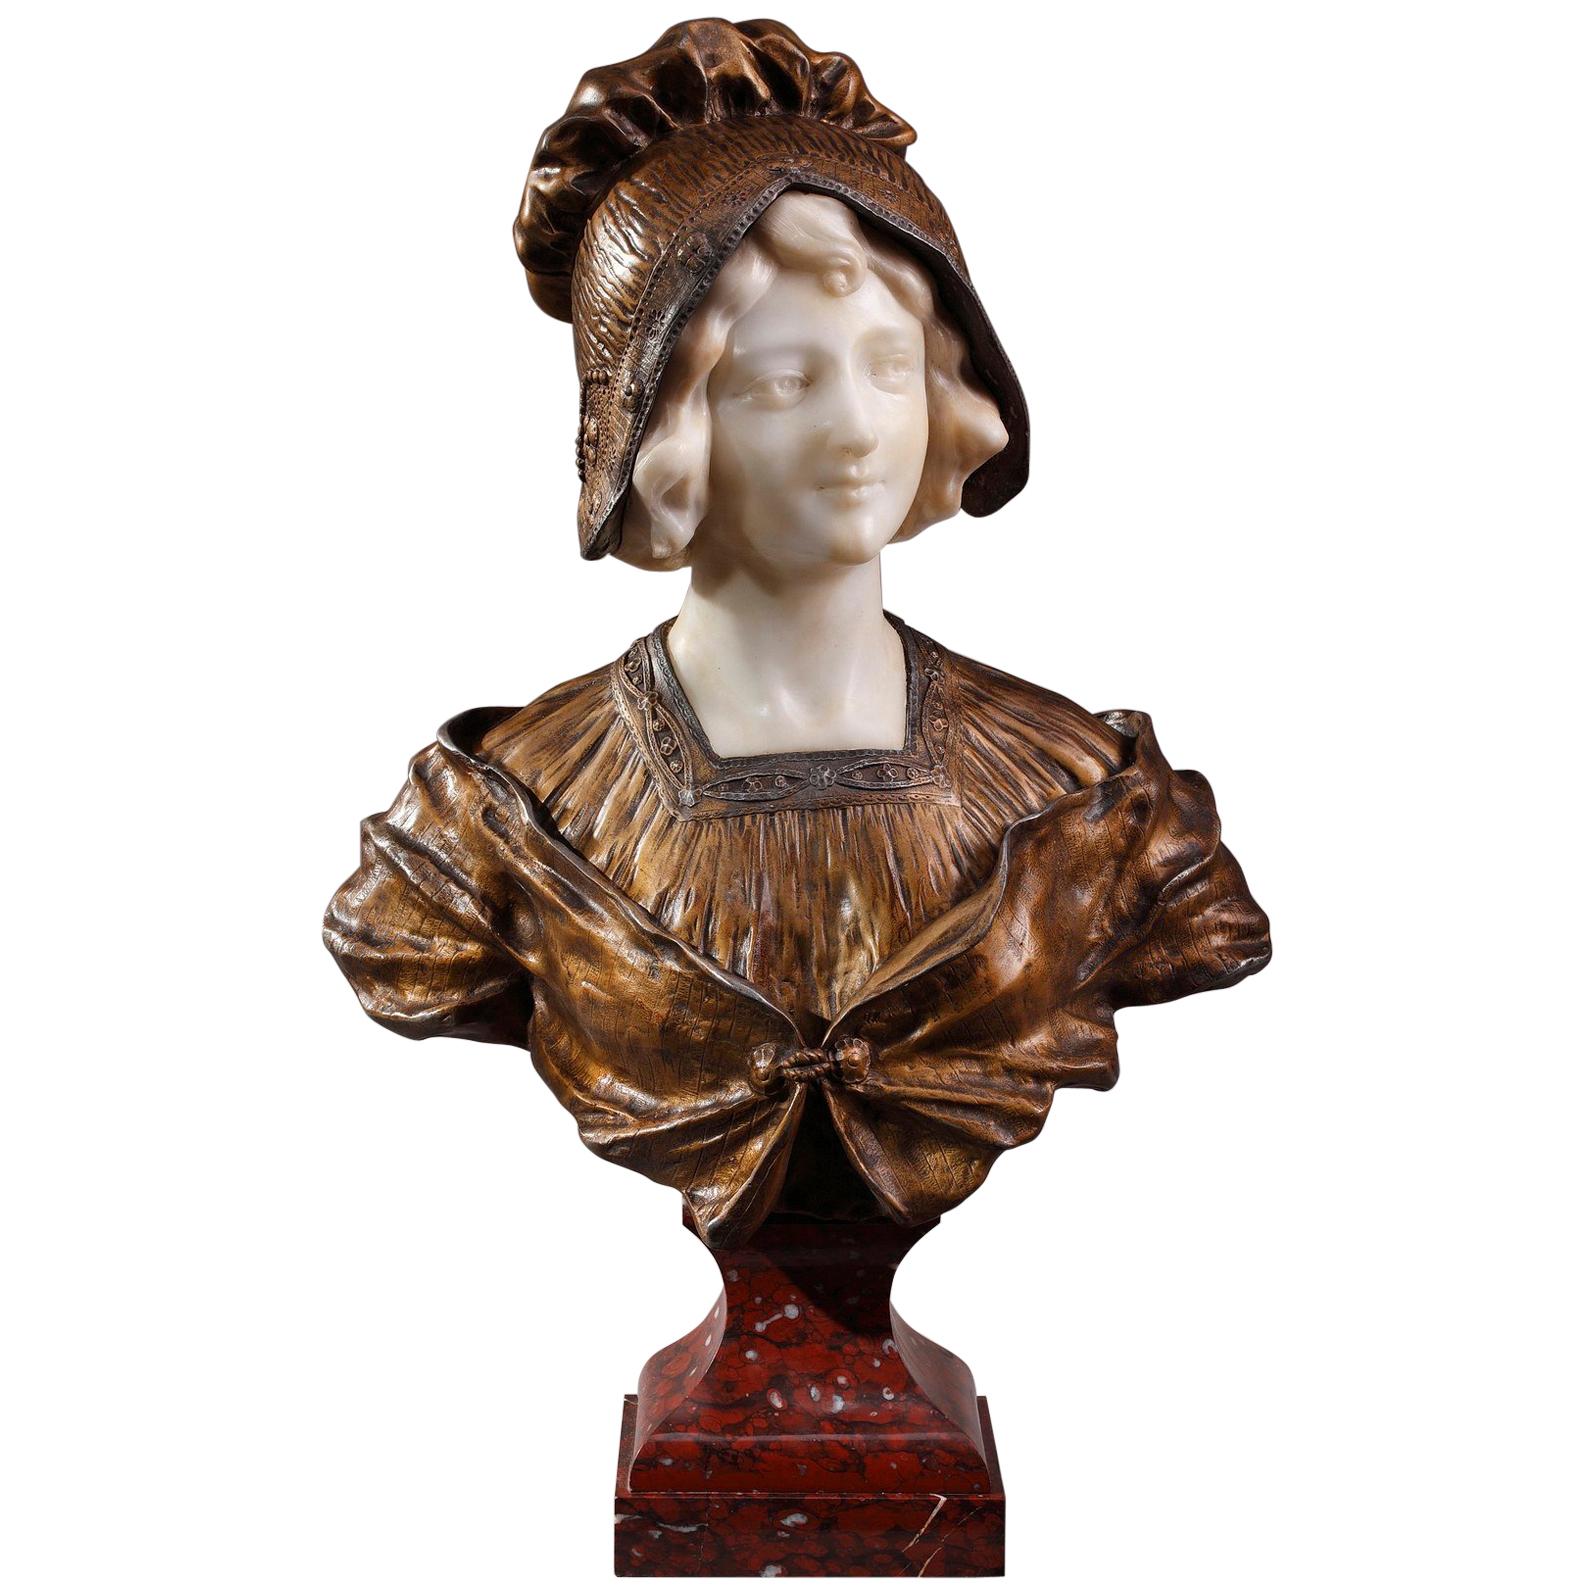 Early 20th Century Art Deco Portrait Bust by Affortunato Gory (1895-1925)